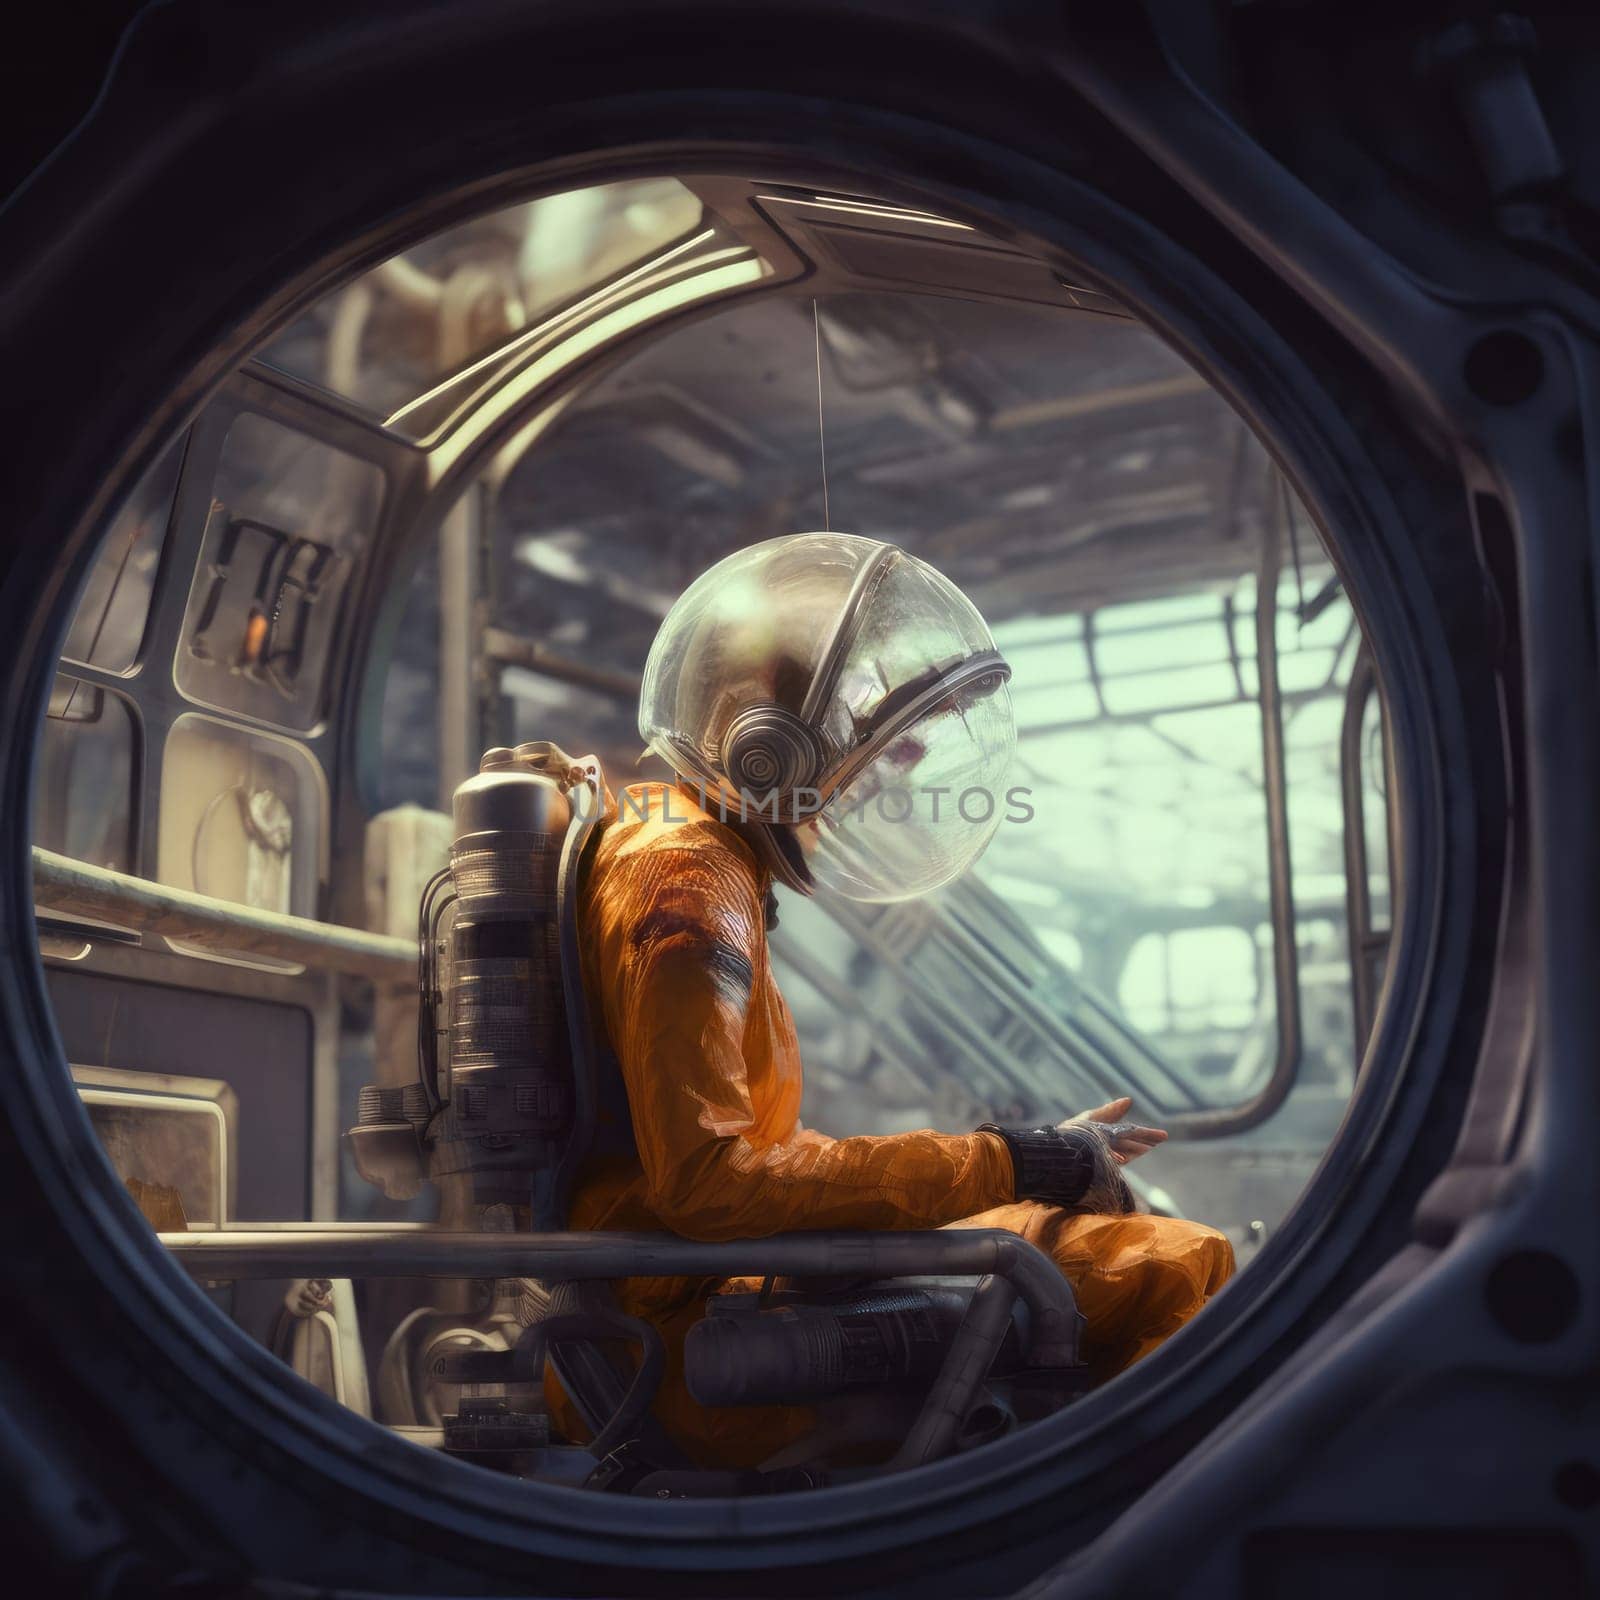 The interior of a space station with an astronaut in a spacesuit by cherezoff